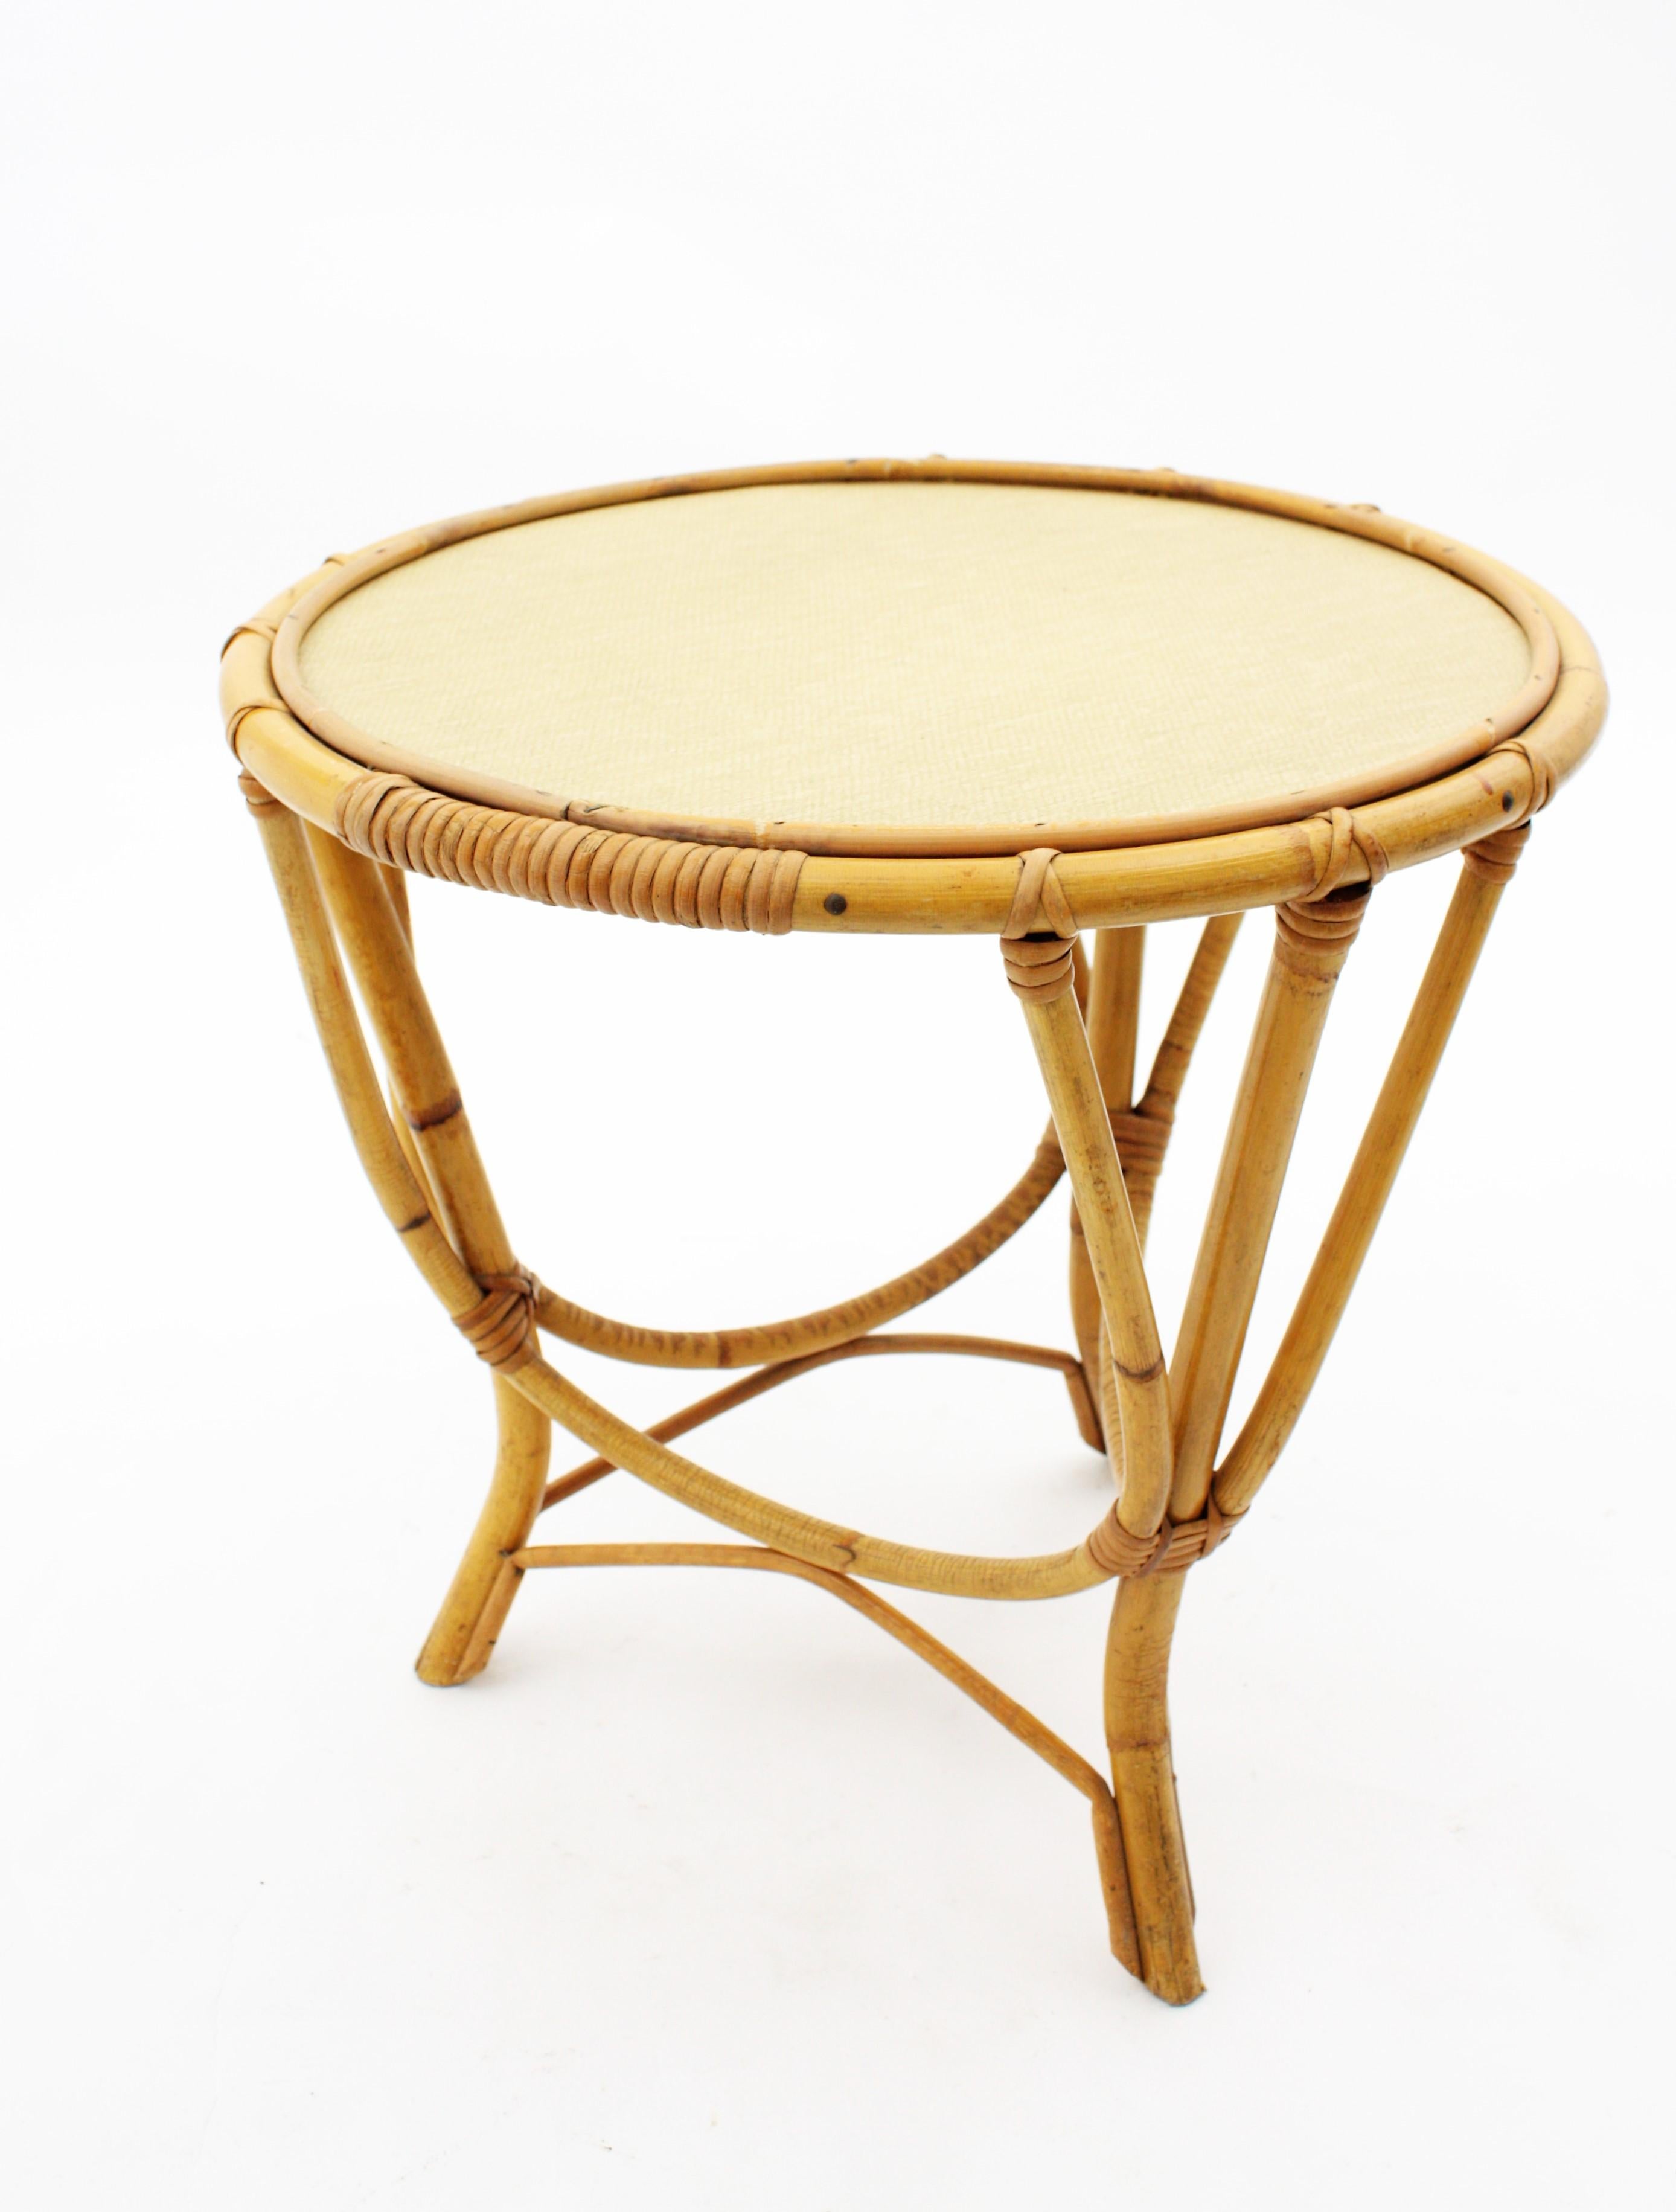 20th Century Bamboo and Rattan Albini Inspired Side Table, Spain, 1960s